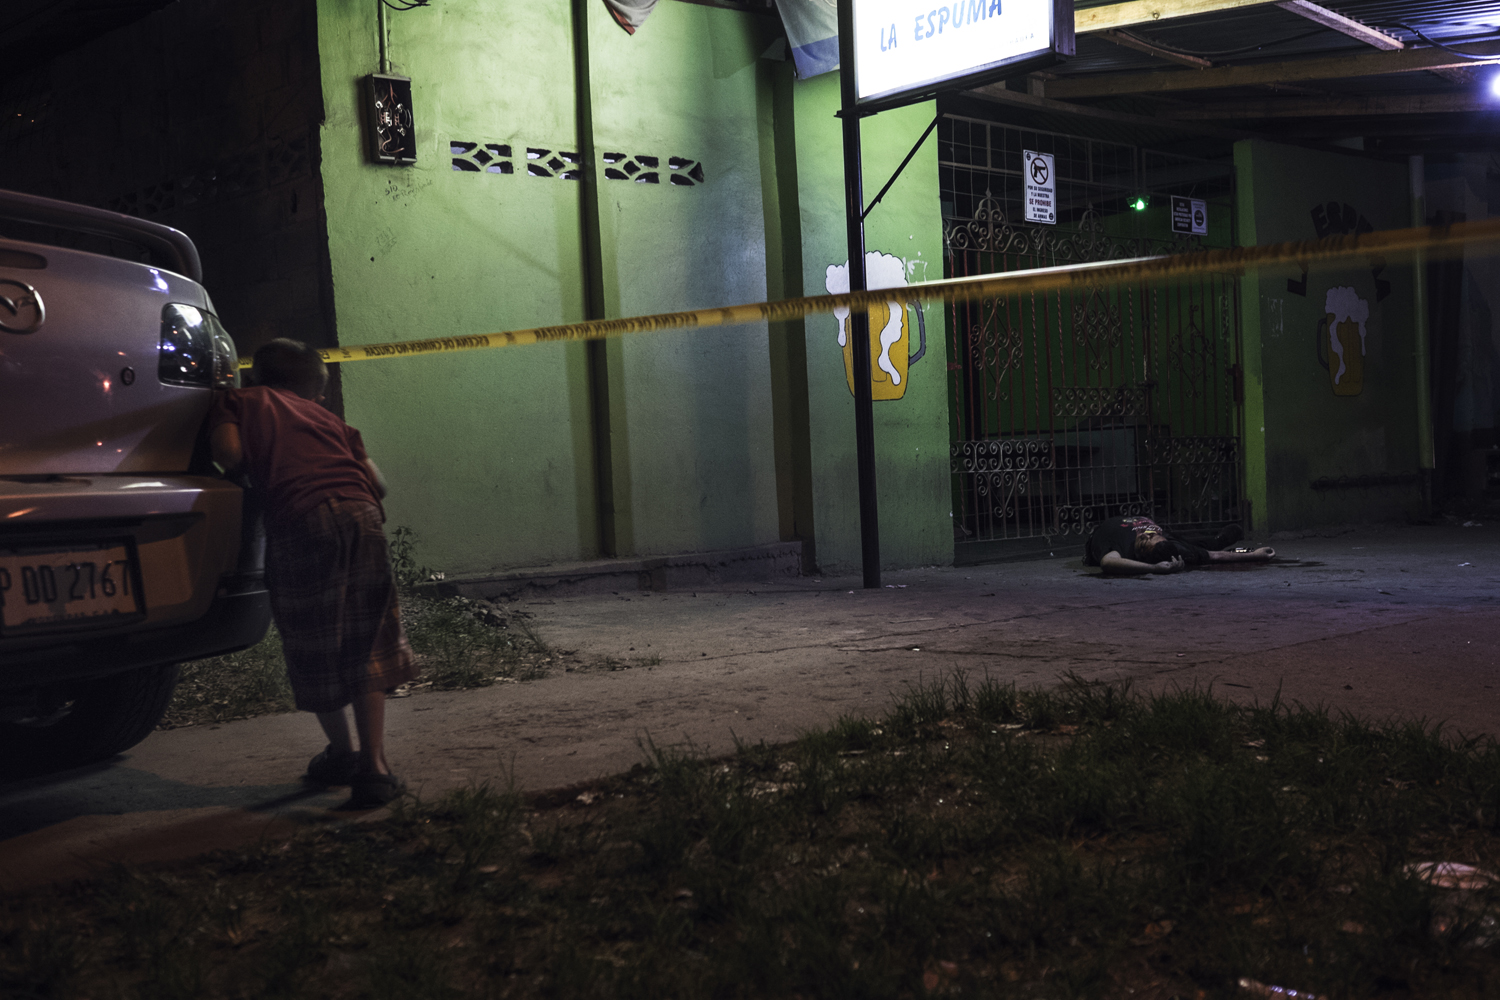 A body in a crime scene wrapped by police tape in San Pedro Sula. Honduras. July 18, 2014.